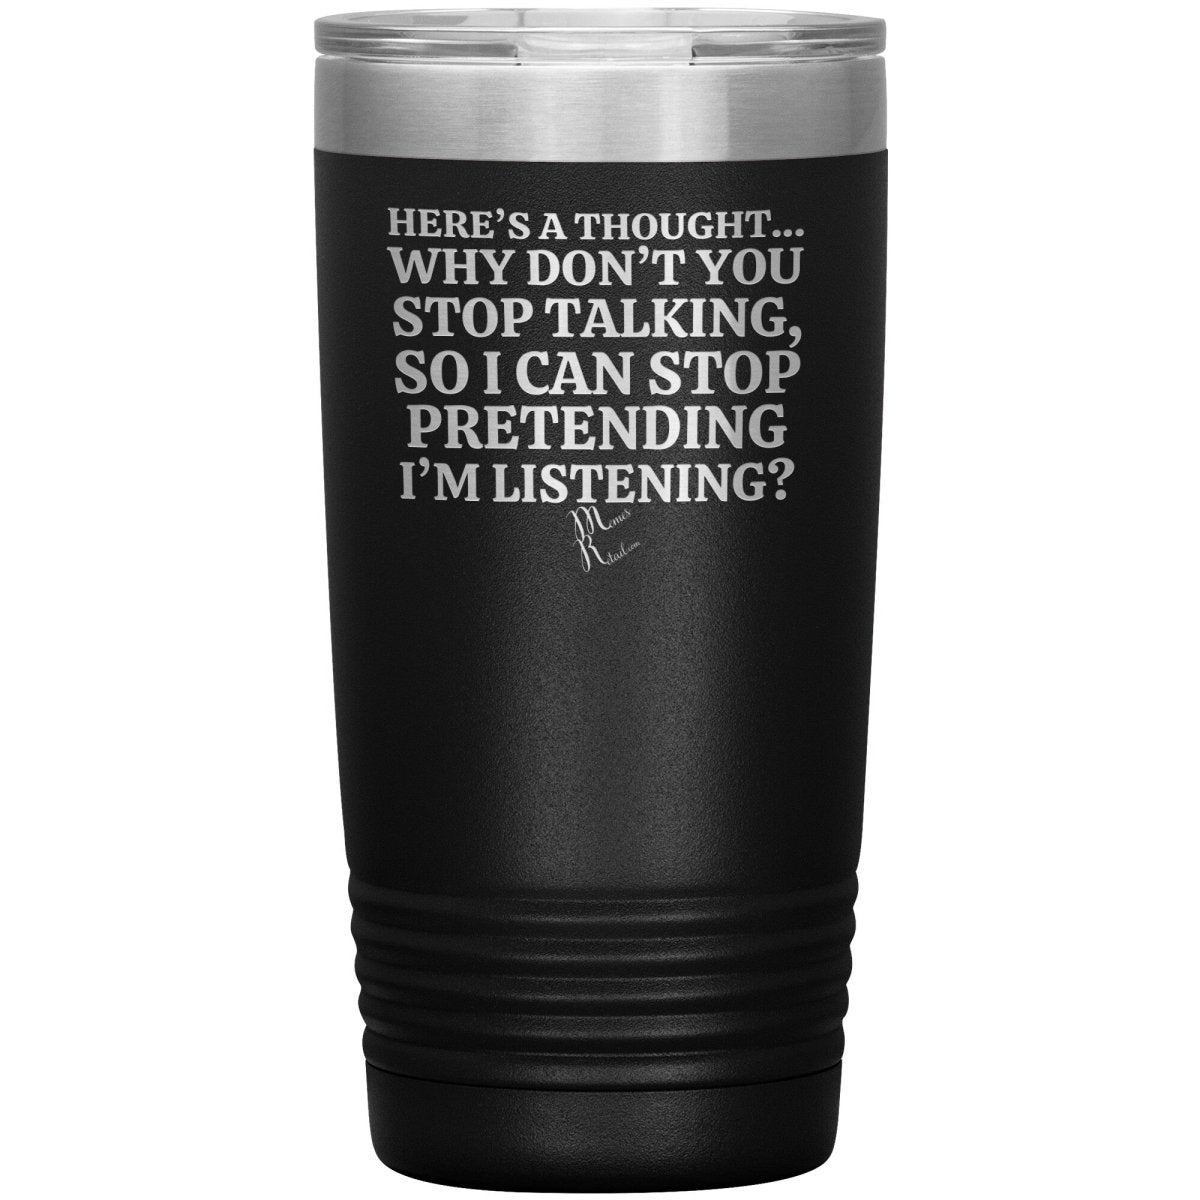 Here's A Thought...Why Don't You Stop Talking Tumblers, 20oz Insulated Tumbler / Black - MemesRetail.com